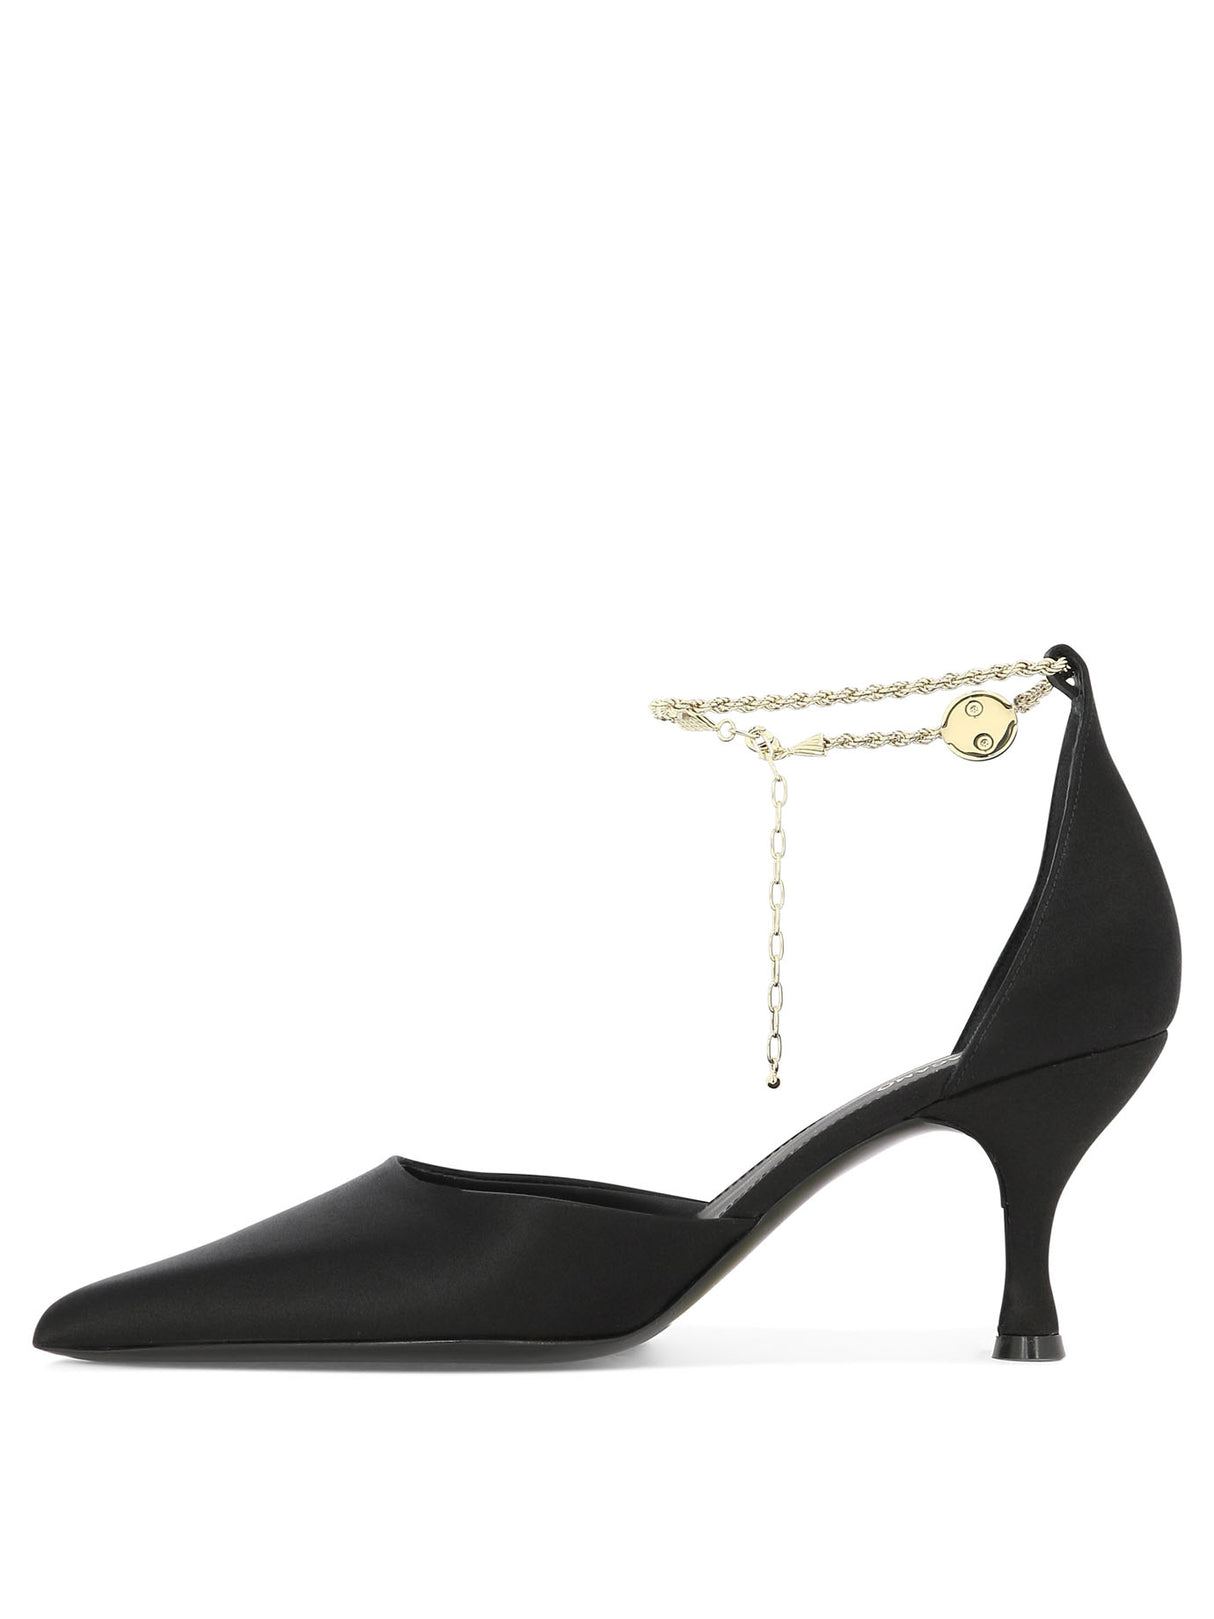 Stunning Black Pumps with Gold Ankle Chain and F Charm Detail